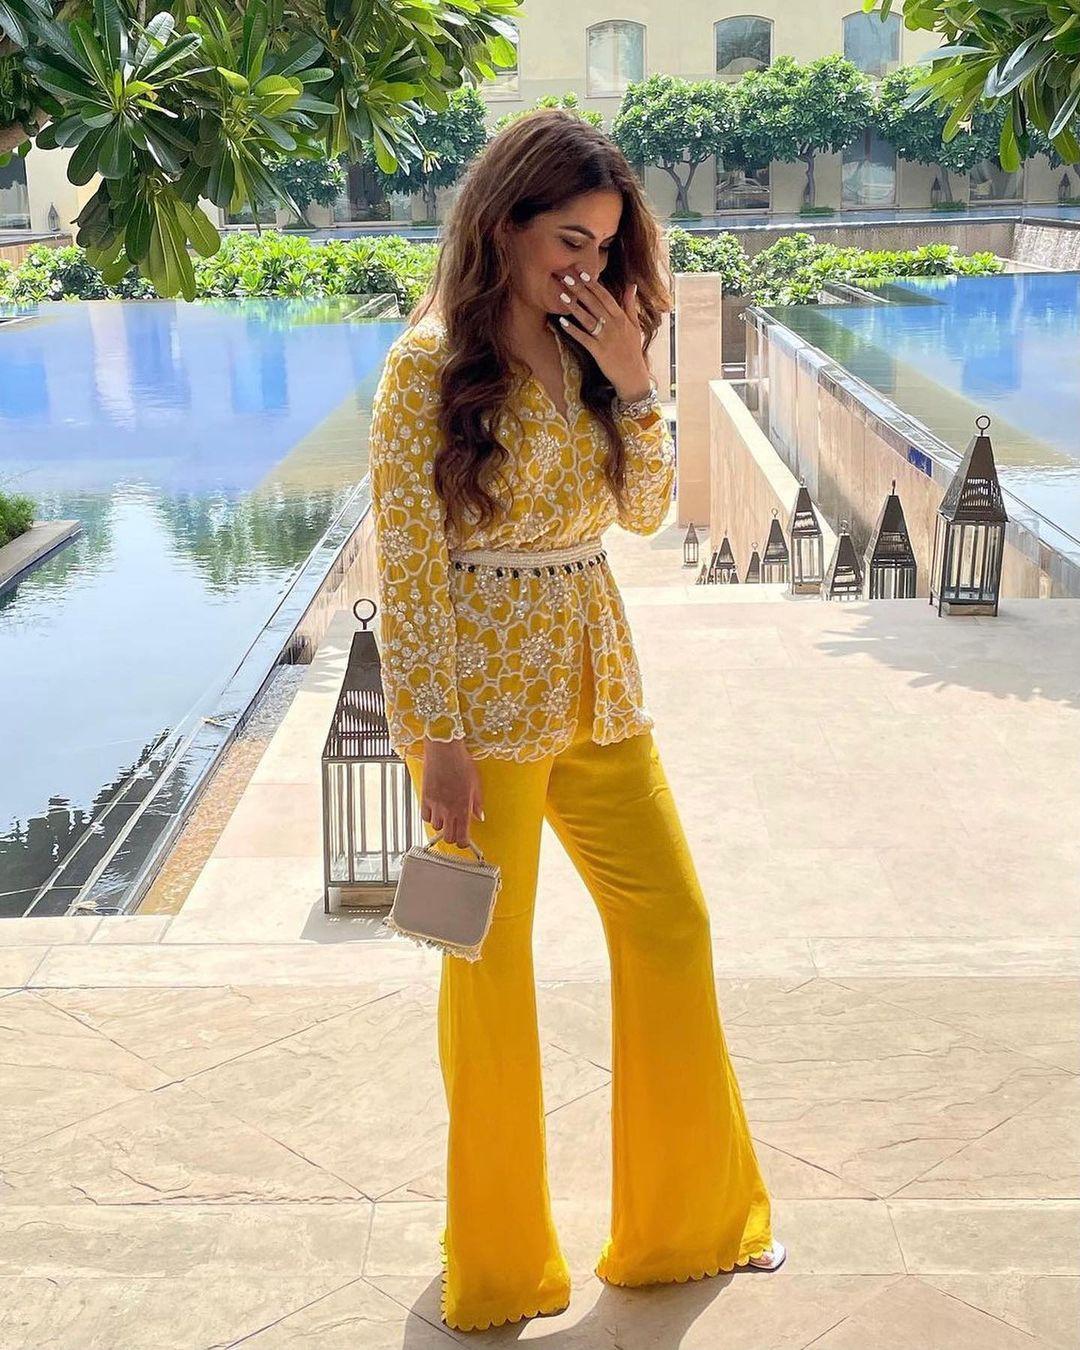 8 Haldi Ceremony Dresses Ideas For The Beautiful Bride-to-be